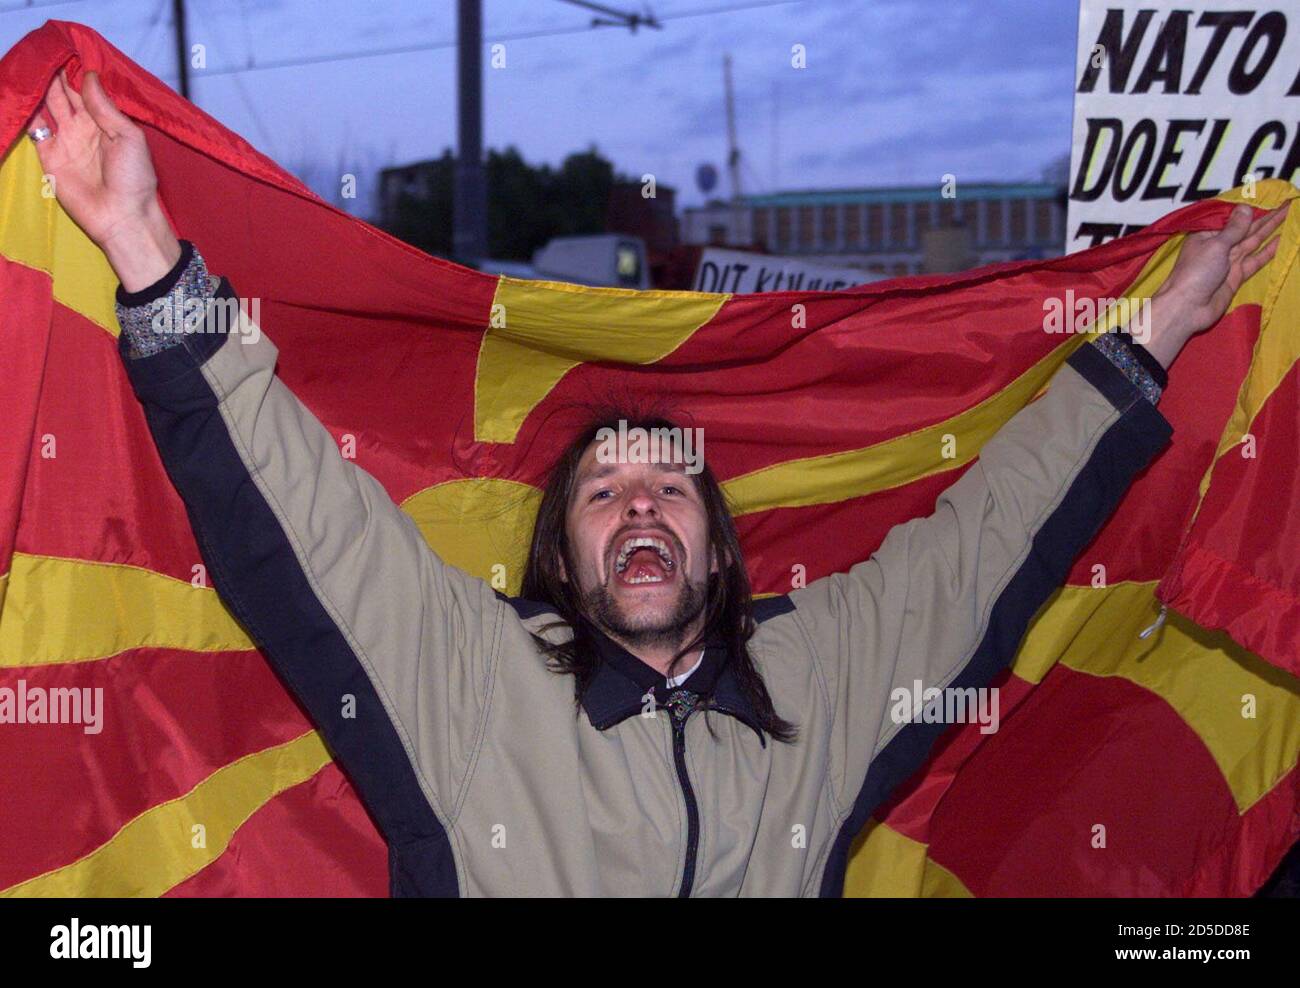 A Dutch Macedonian man with a Macedonian flag shouts anti-NATO slogans during a peaceful protest in Rotterdam April 22. Yugoslav Macedonians, Croats, Serbs and Gypsies protested against the bombing of their mother country Yugoslavia by NATO air power.  FEE/CLH/ Stock Photo